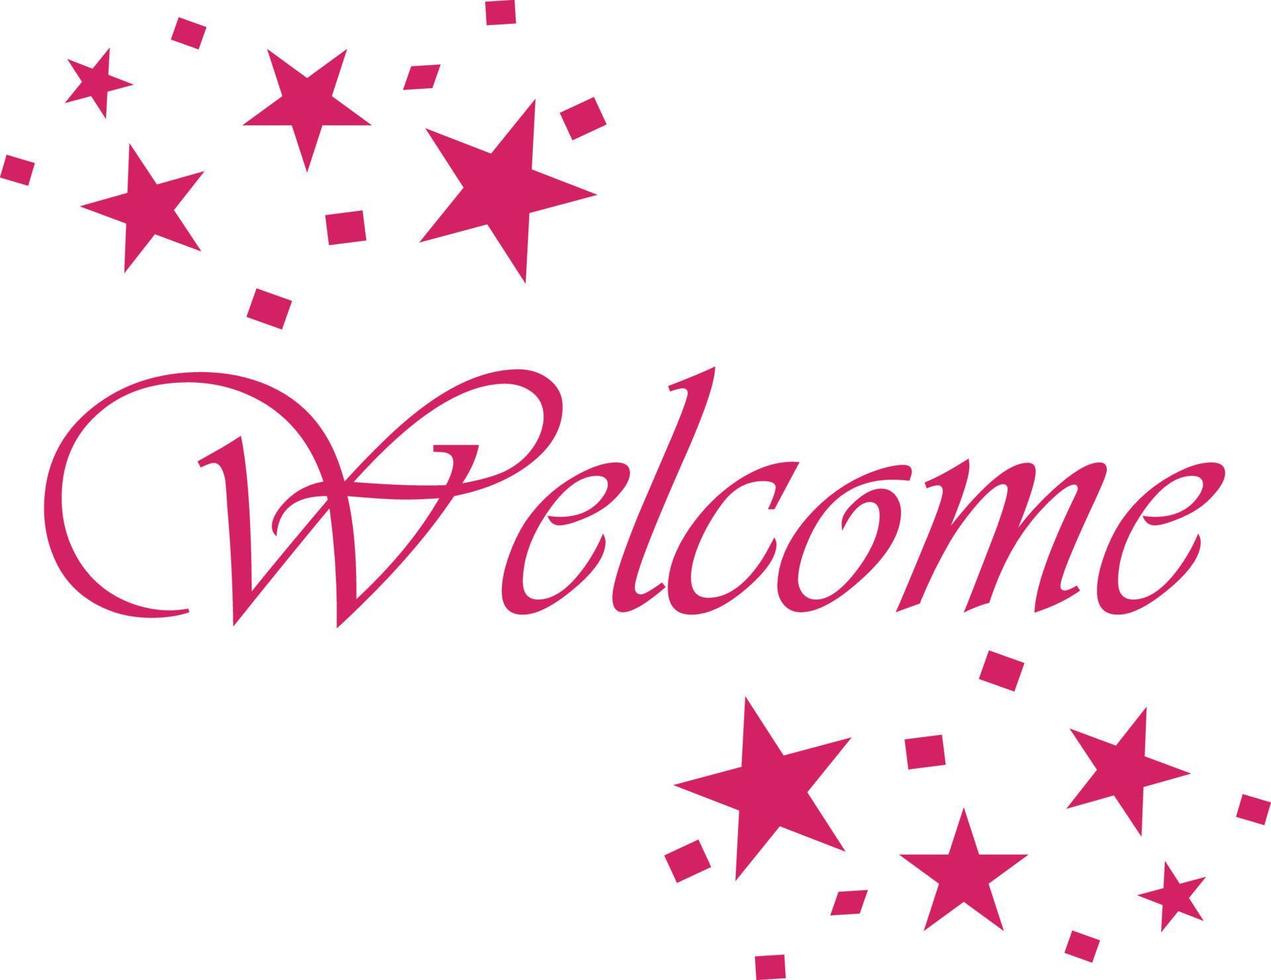 Welcome text font style with stars design vector